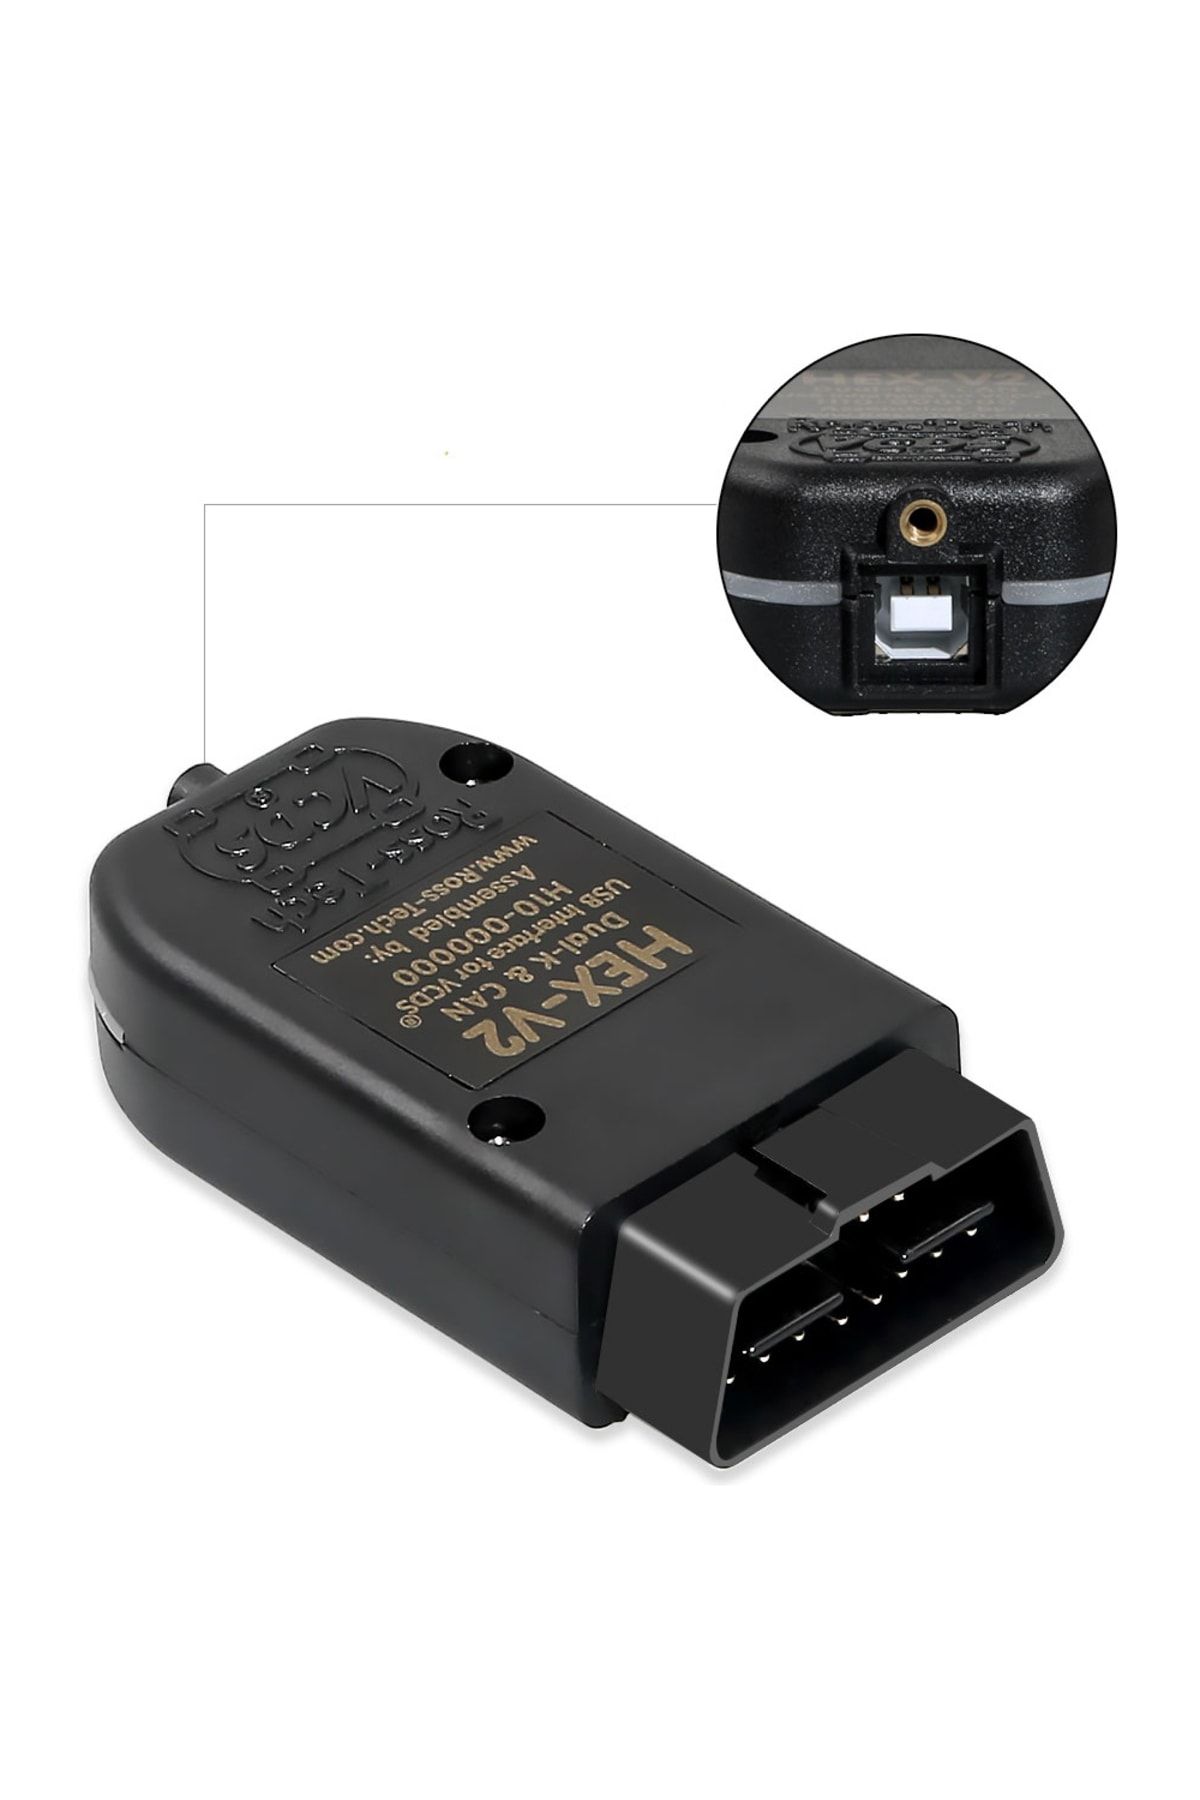 V20.4.2 VCDS Hex-V2 Can USB Clone Unlimited VCDS V2 With Multi